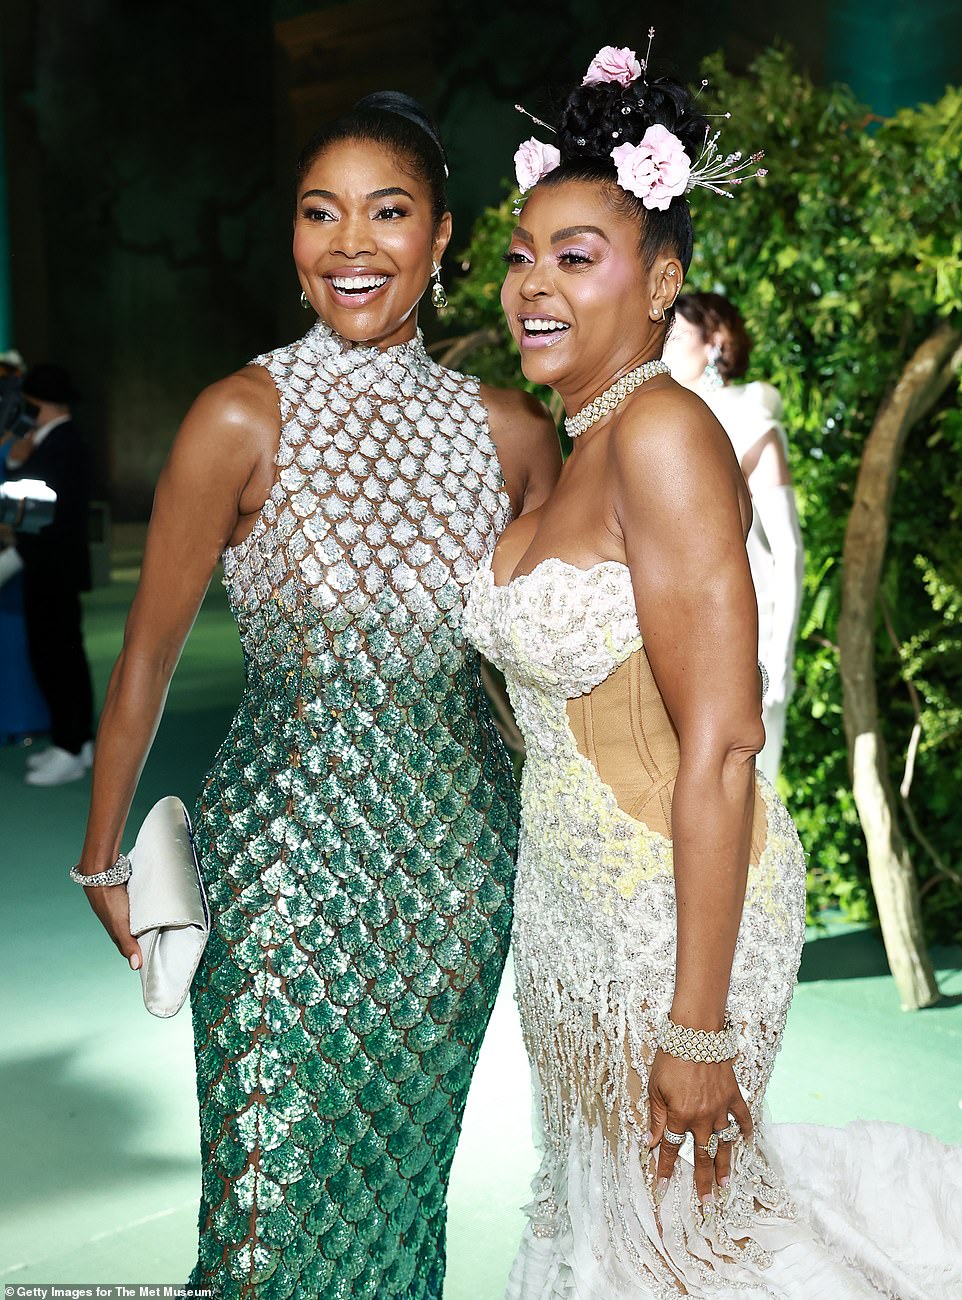 Evergreen beauties Gabrielle Union and Taraji P. Henson shared a laugh together